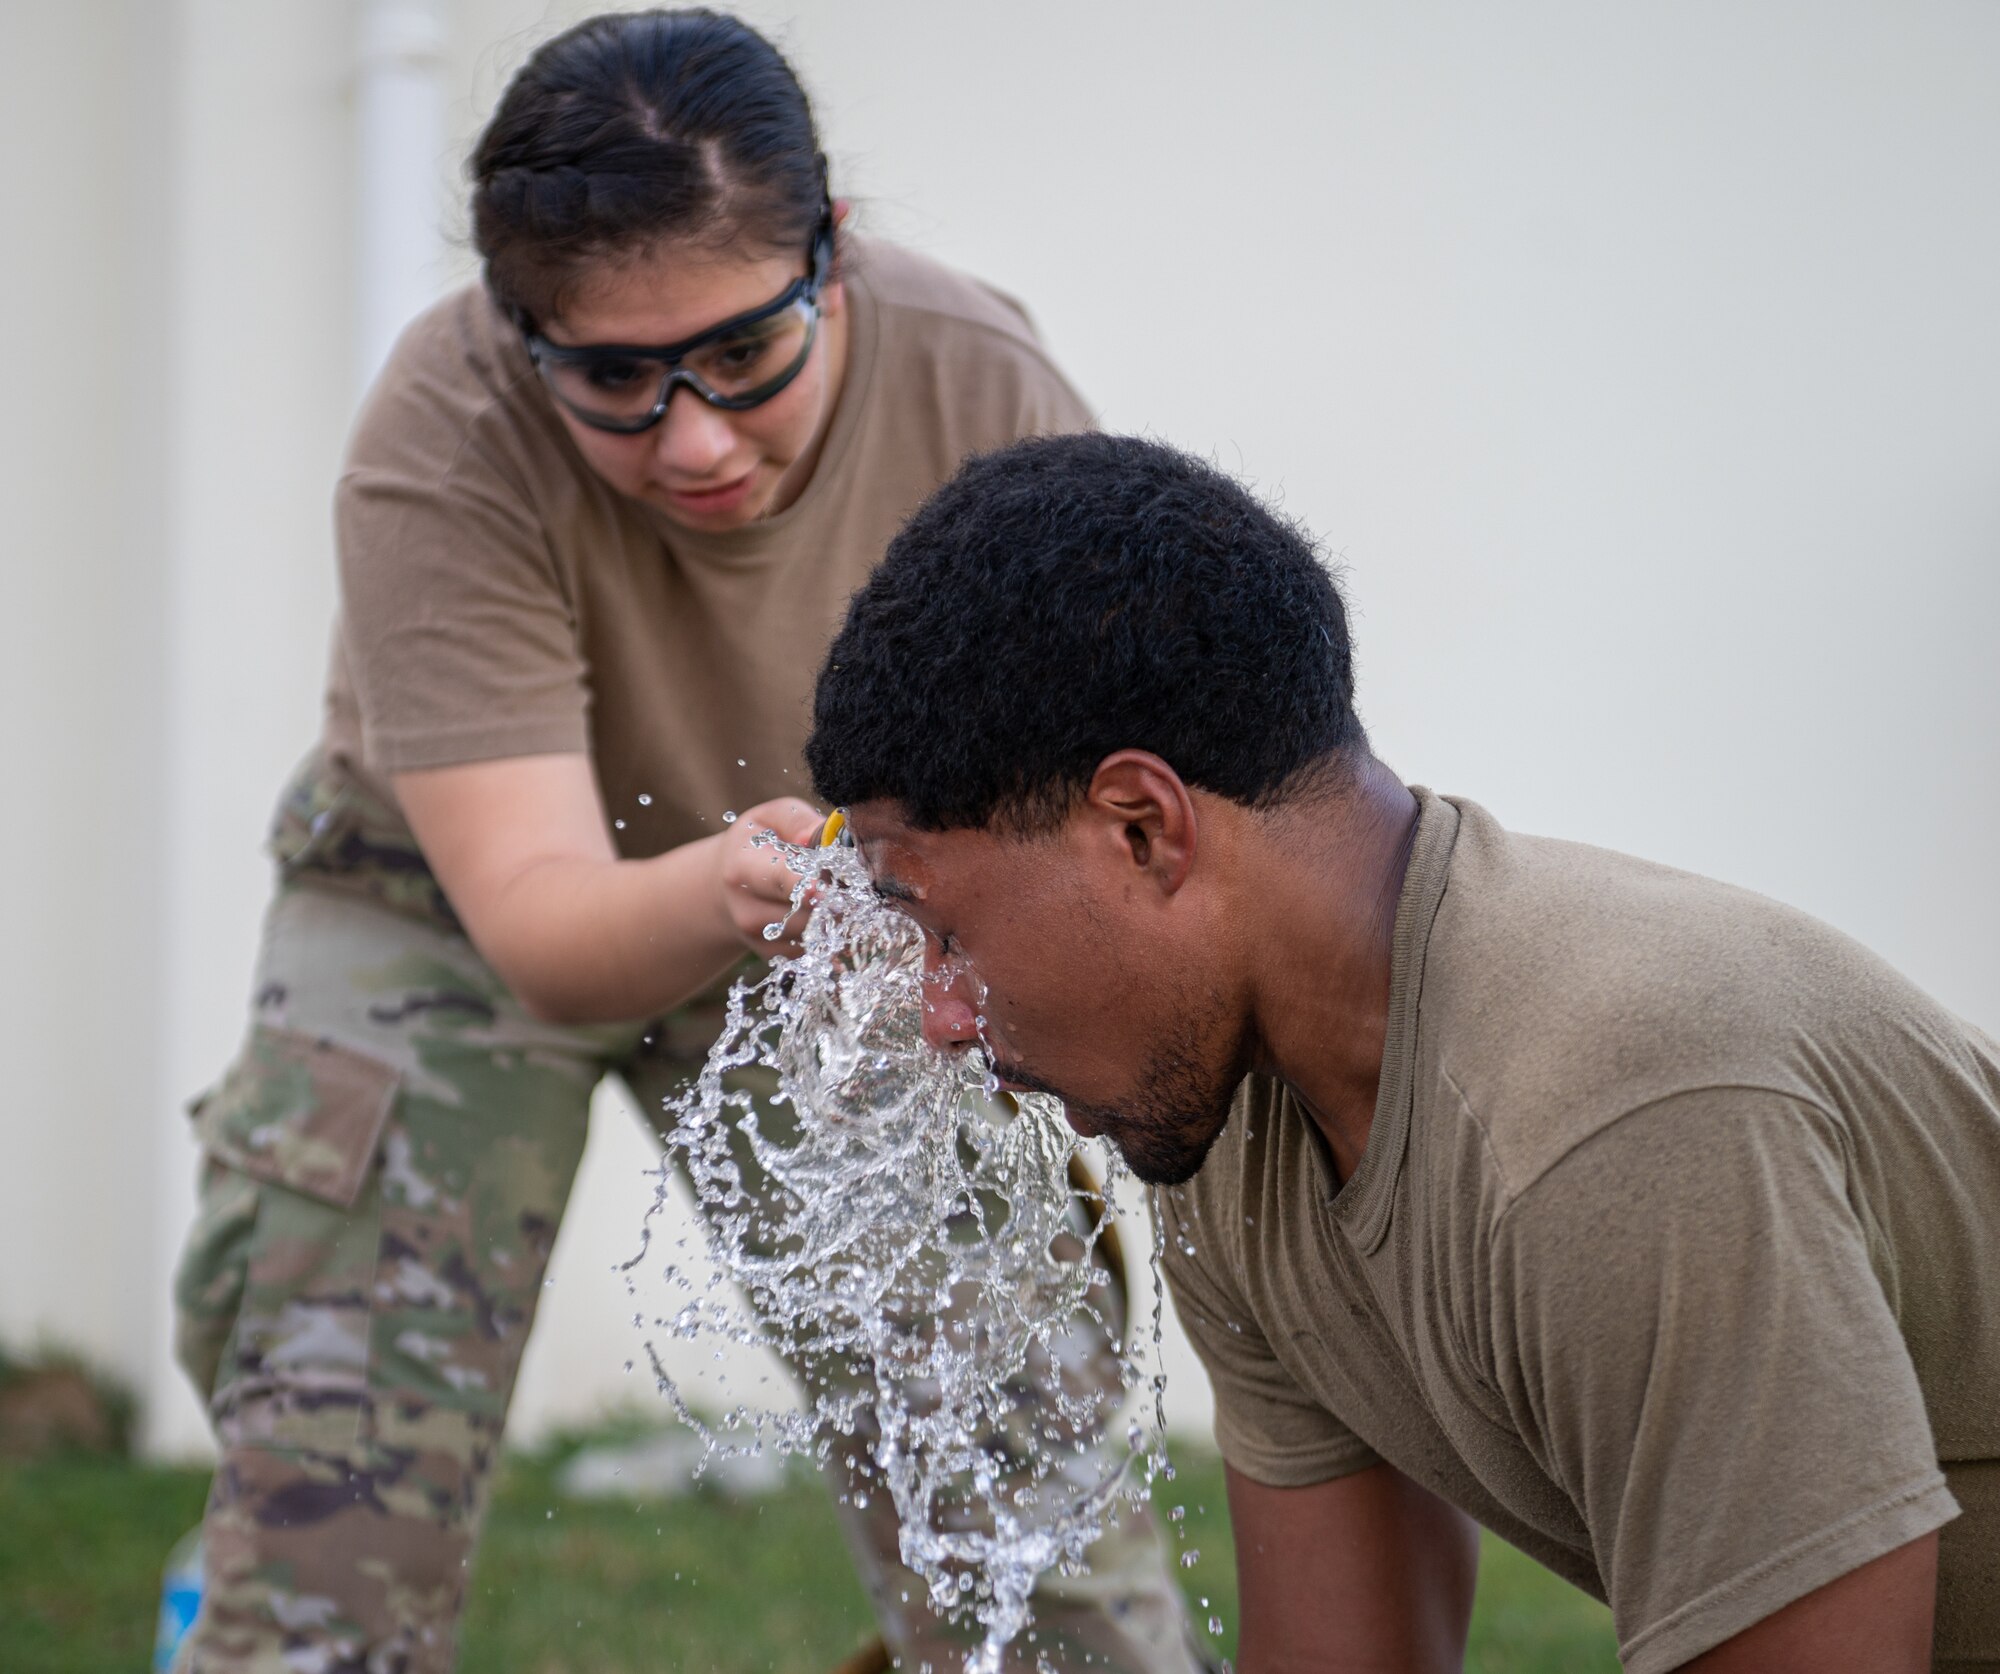 Airmen getting sprayed with water in his eyes.